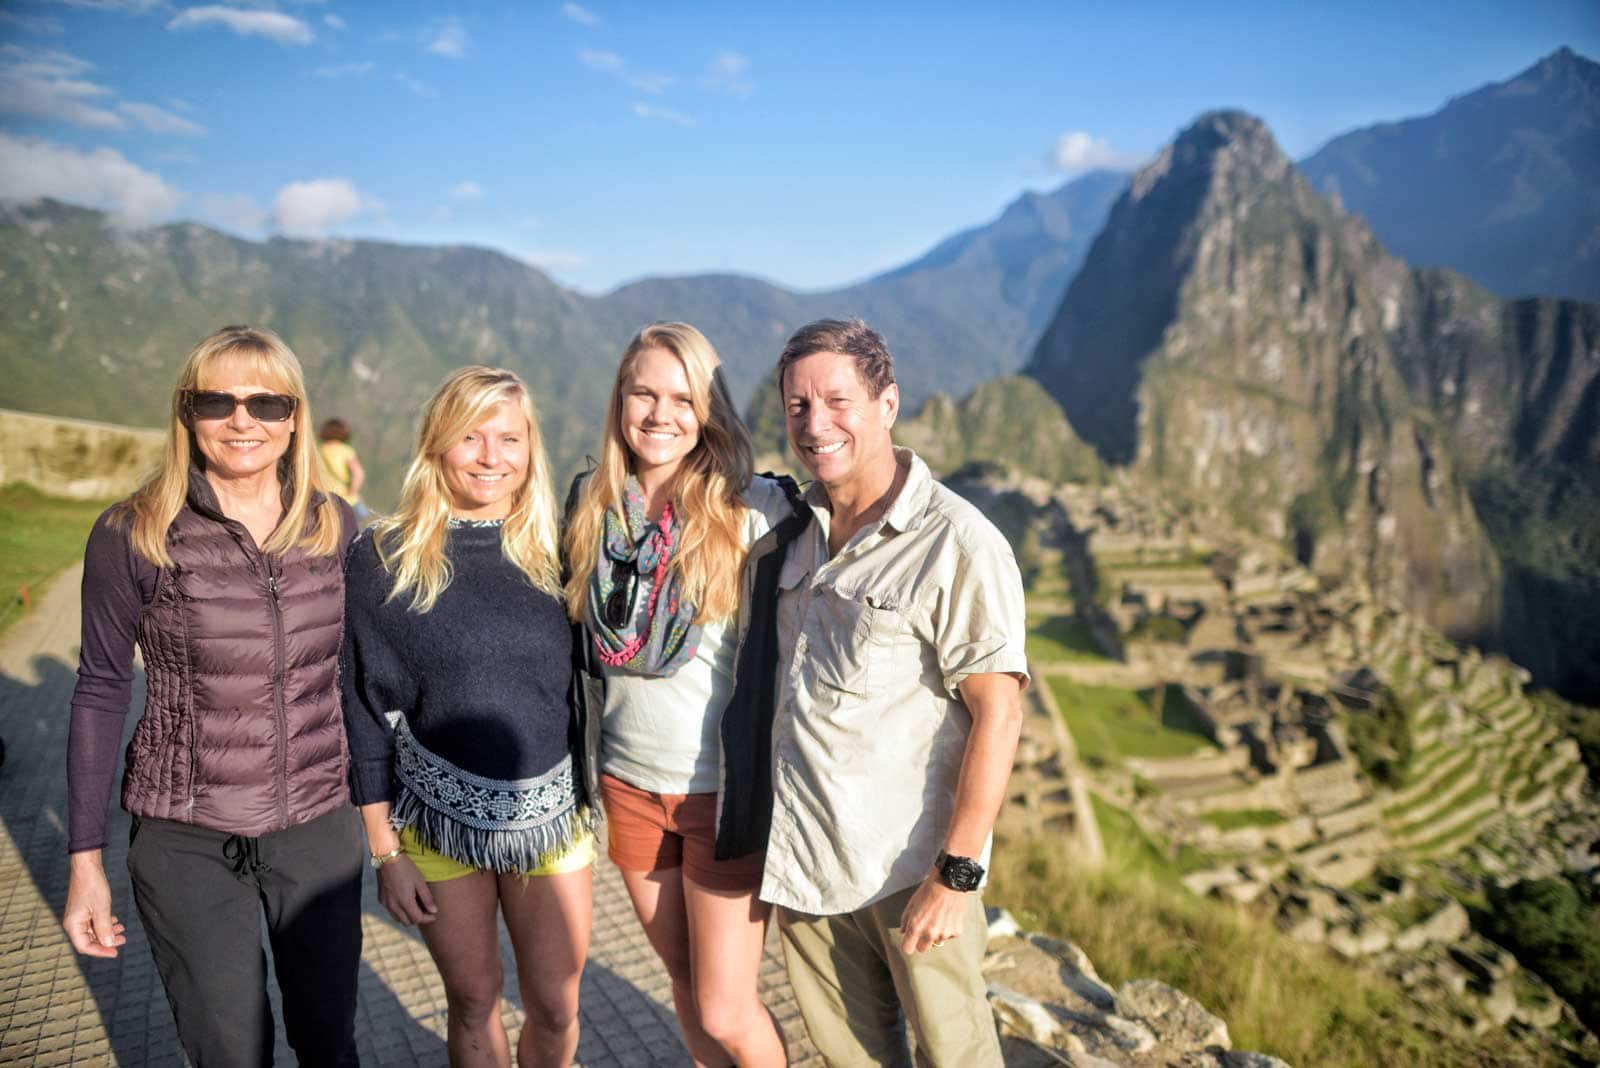 Traveled with a family to Peru to take photos of them on vacation